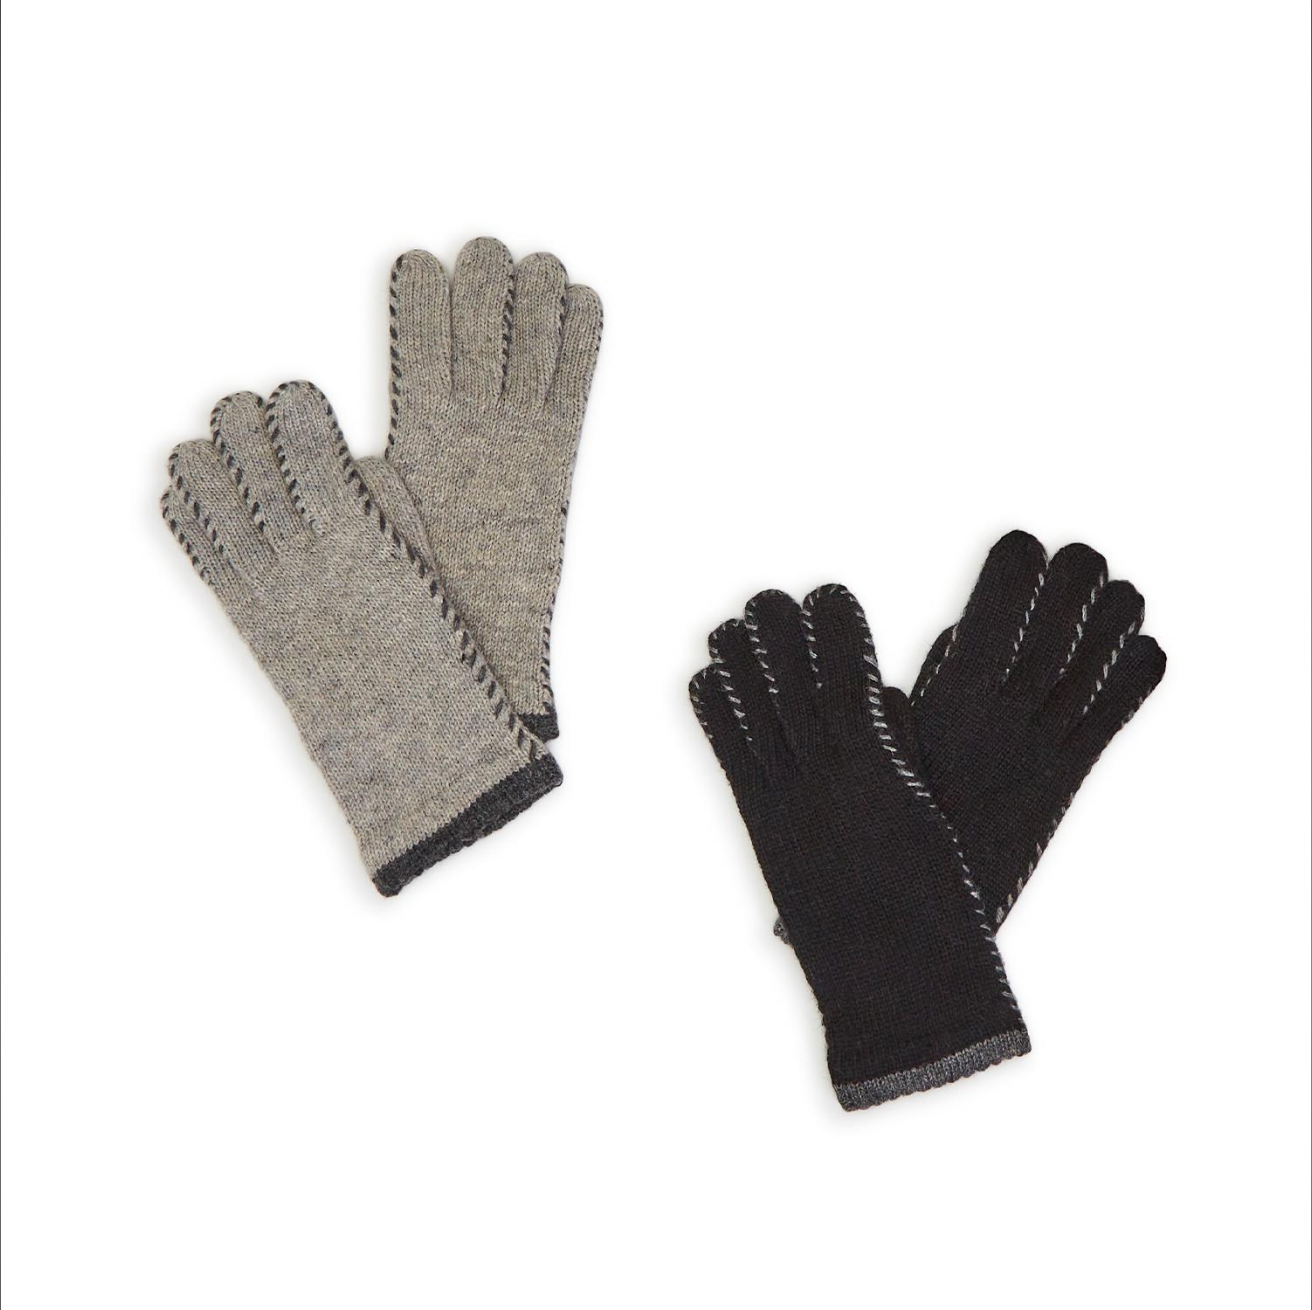 Knit Glove With Contrast Stitching